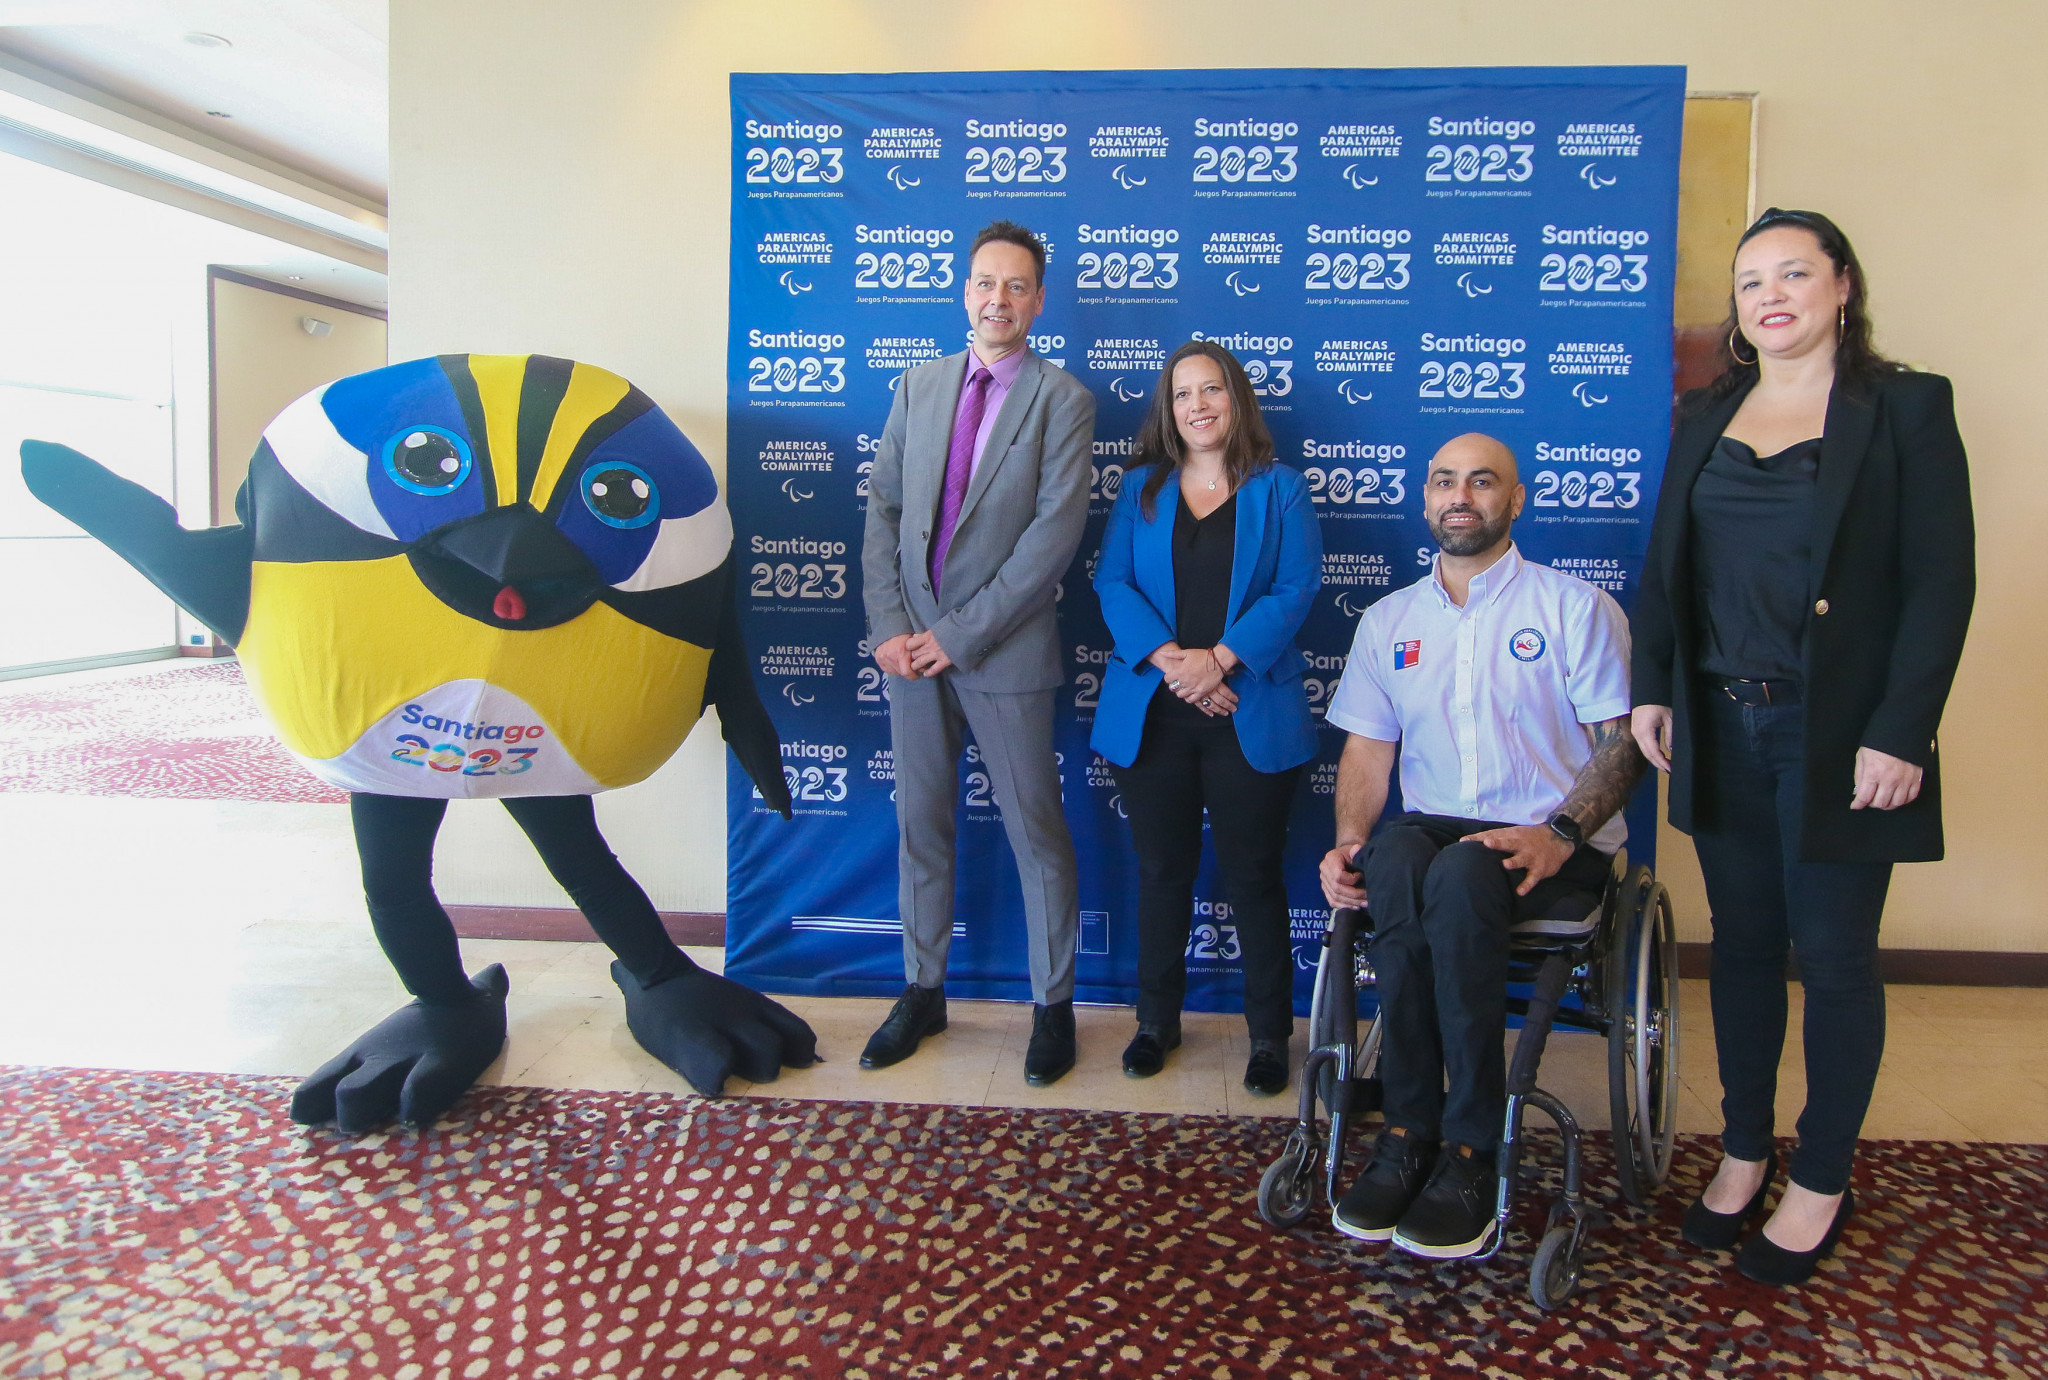 IPC visit Santiago 2023 to mark one-year-to-go until start of Parapan American Games